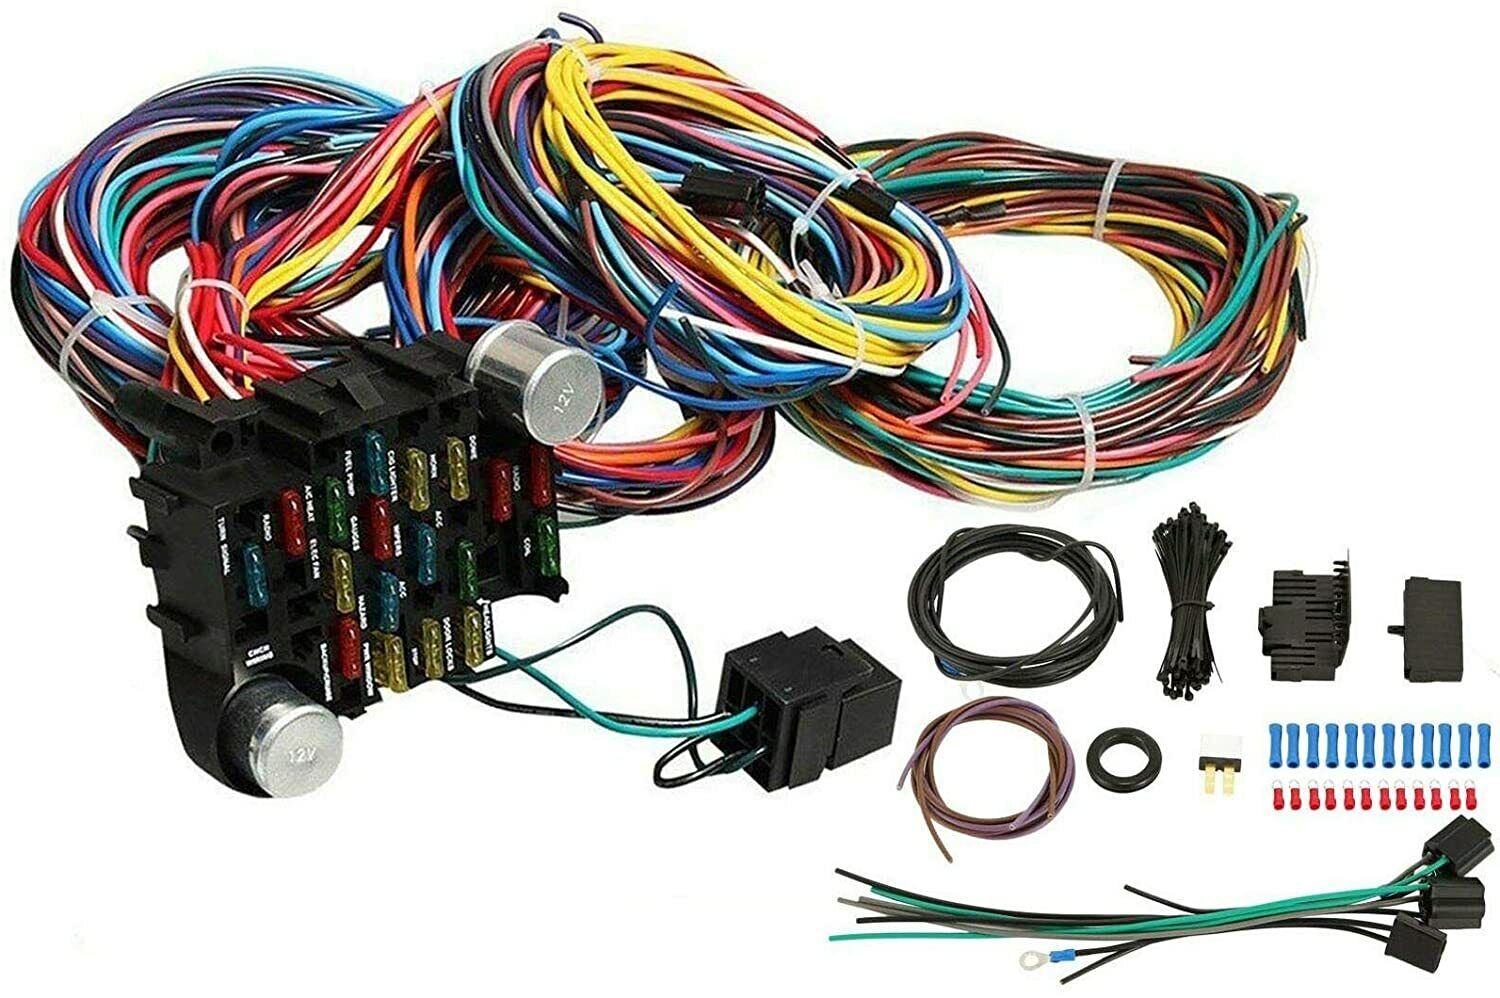 21 Circuit Wiring Harness for Chev Mopar Ford Hotrods Universal Extra Long Wires